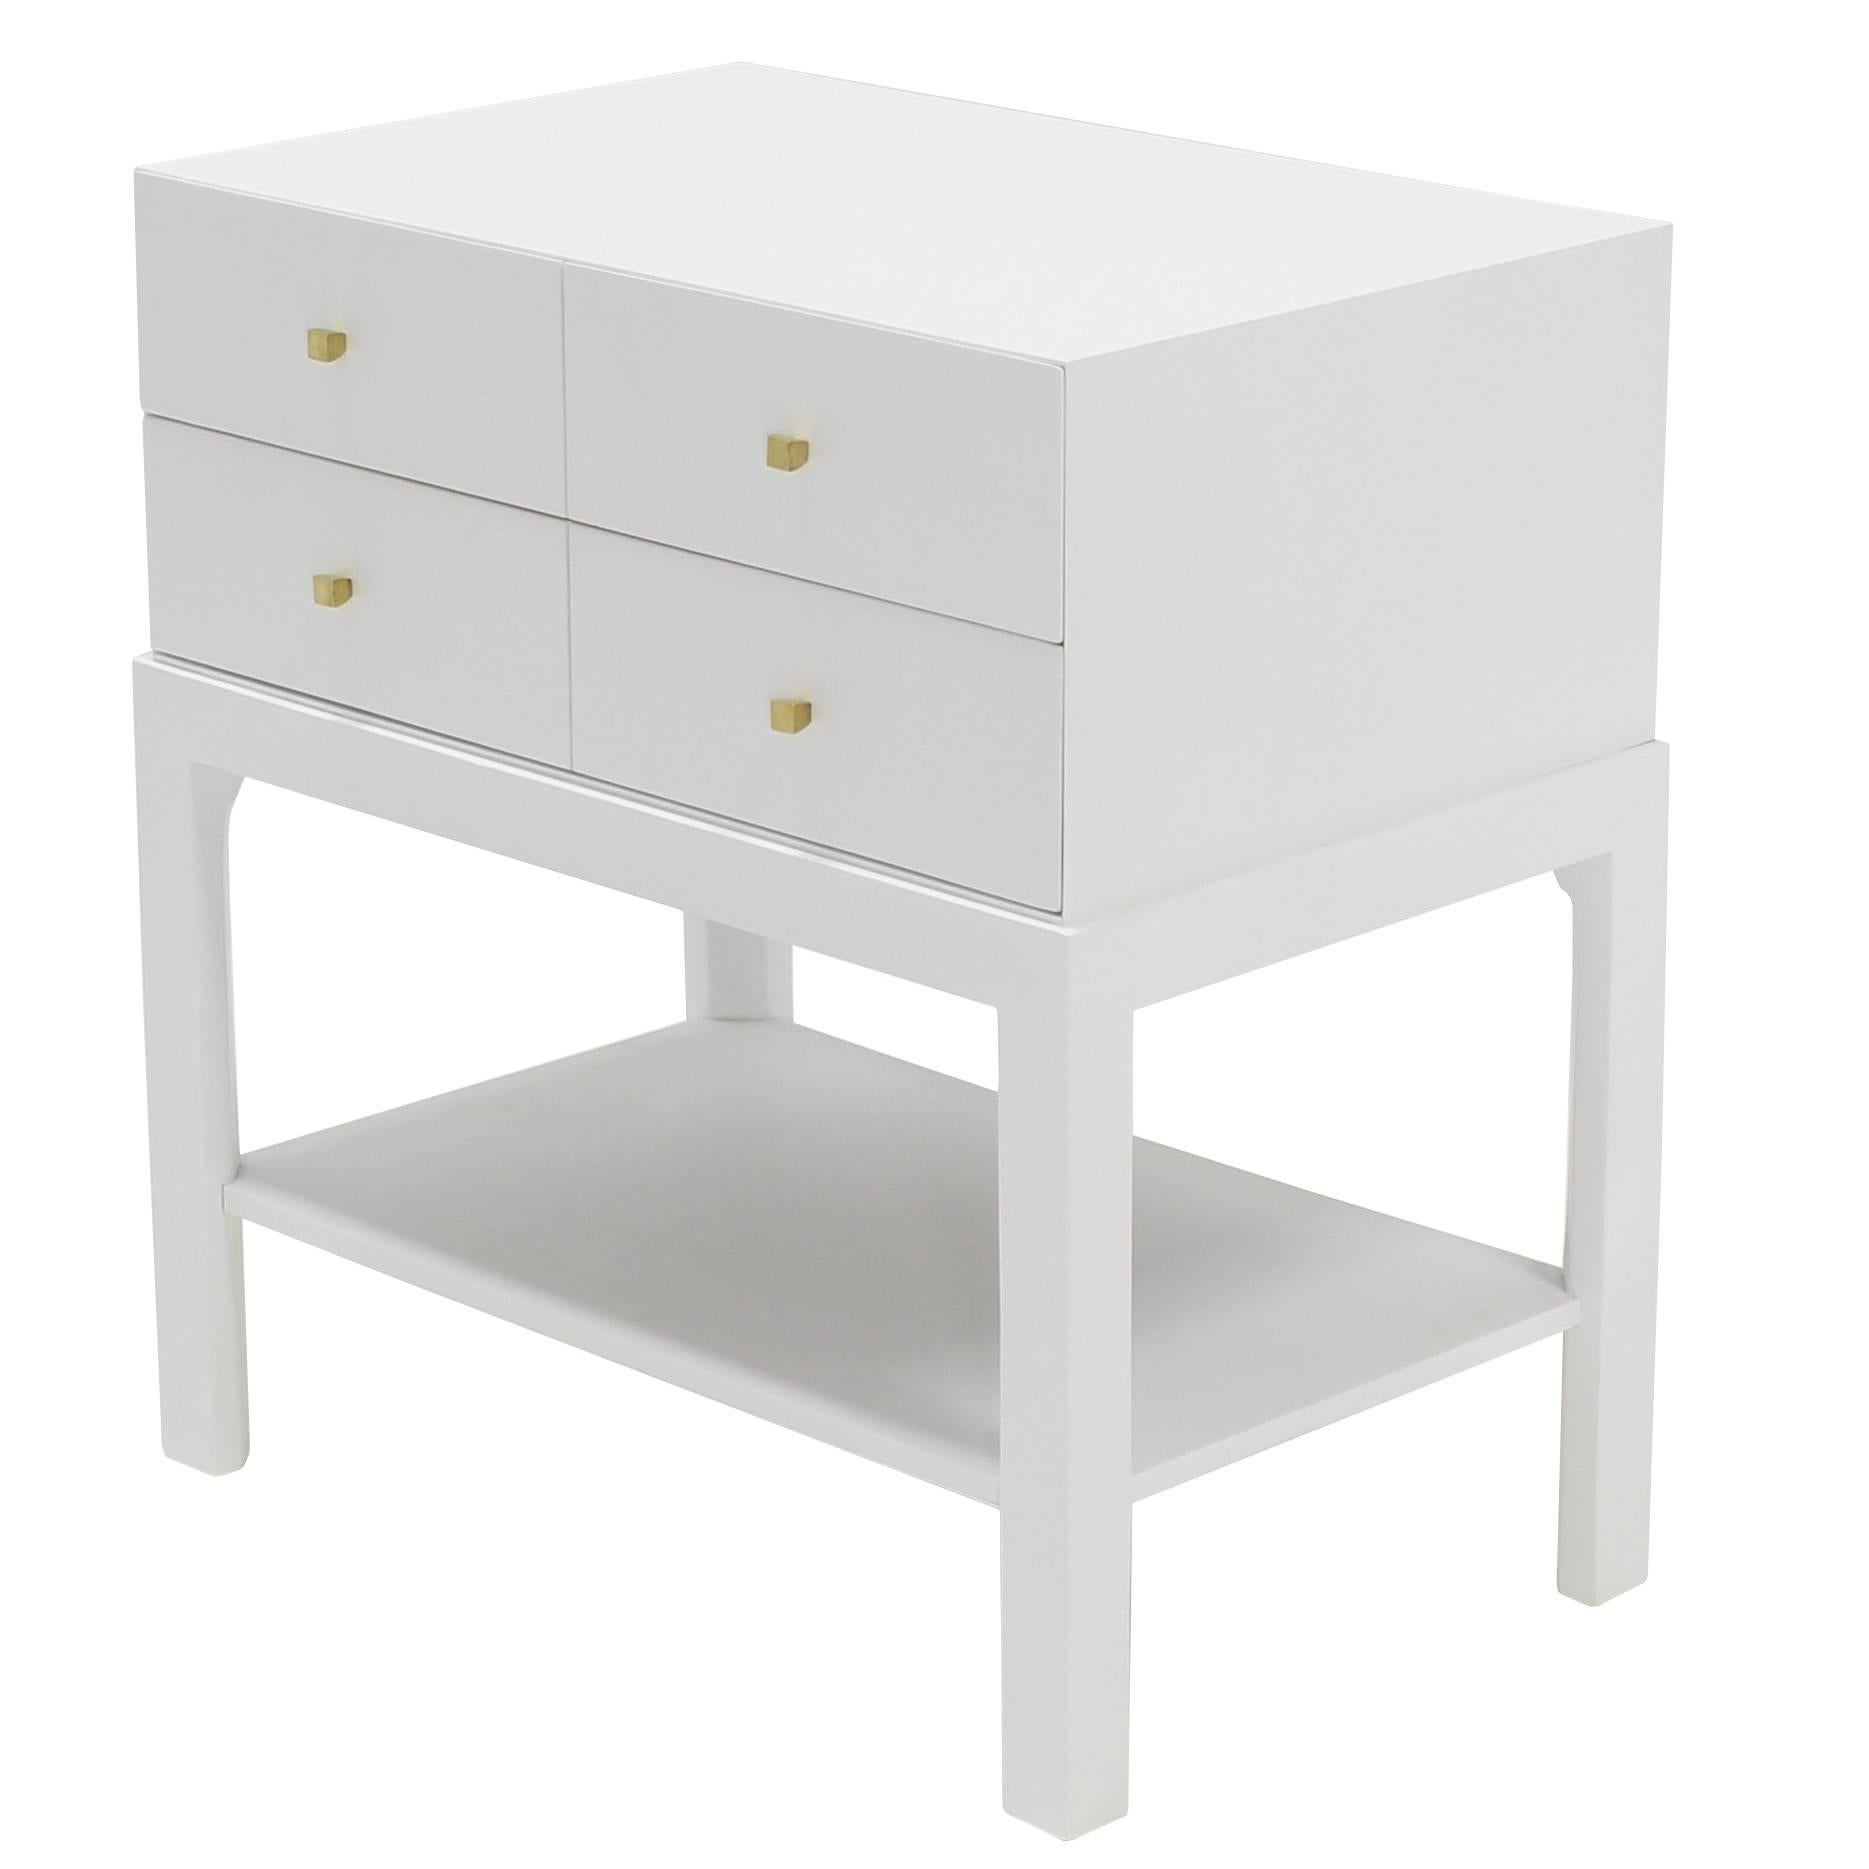 White Lacquer Diamond Shape Brass Dimond Pulls Two Drawer Nightstand